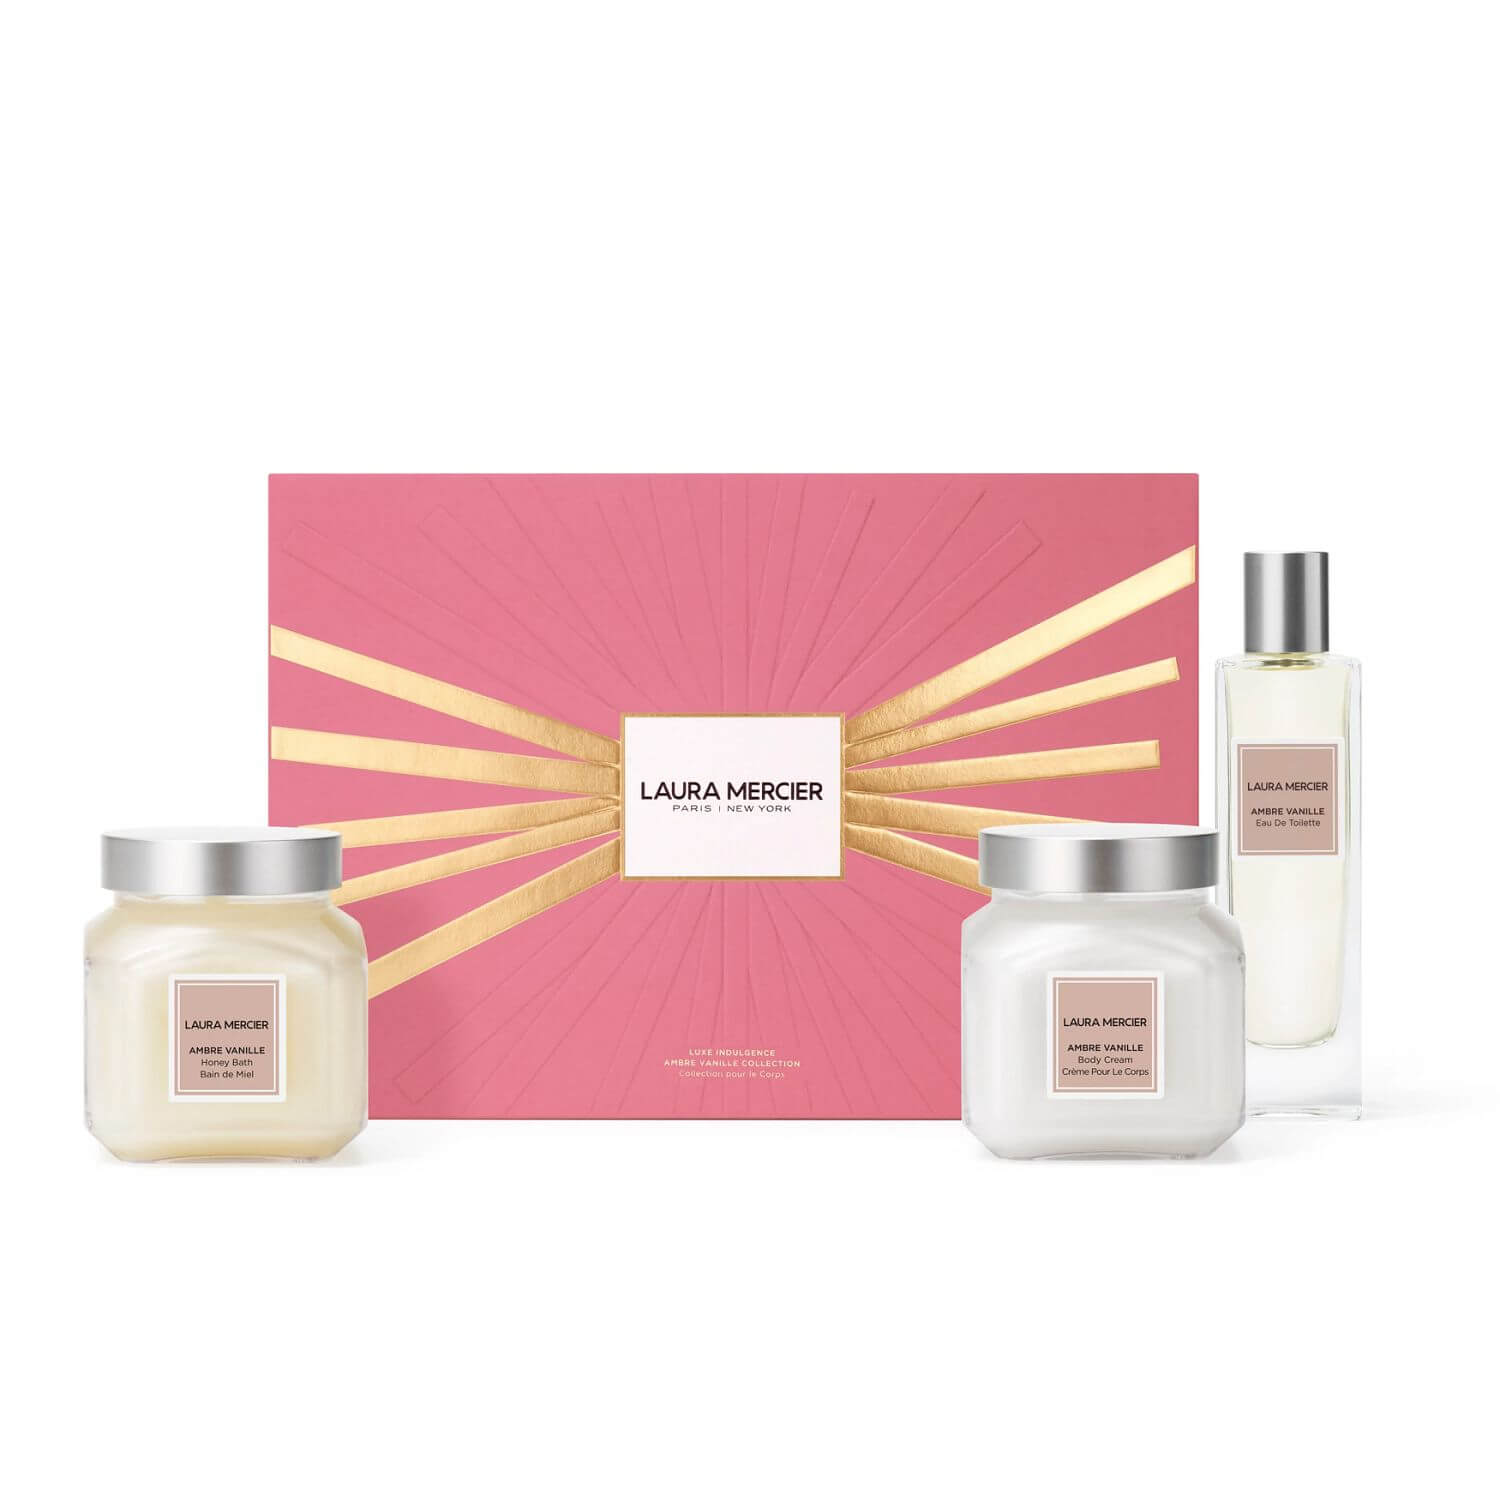 luxe indulgence ambre vanille collection (set cuidado personal)